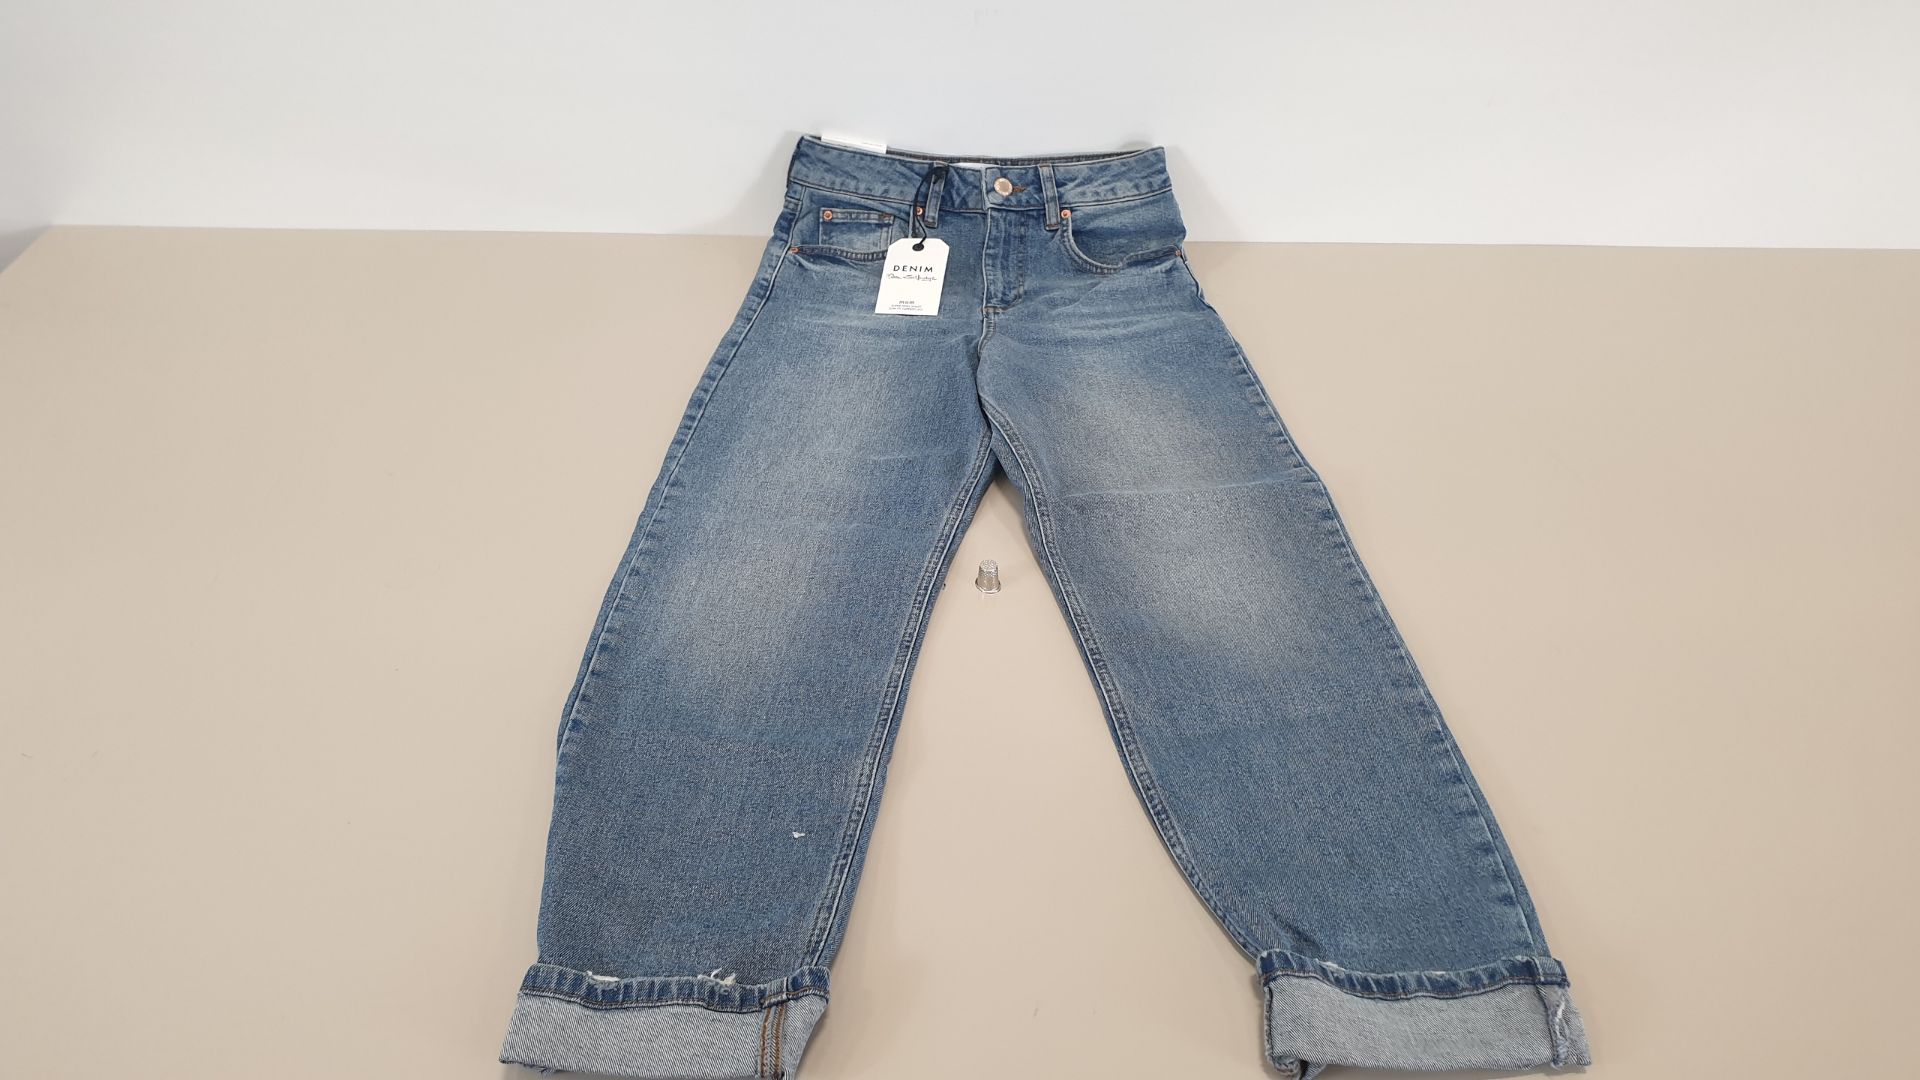 (LOT FOR THURSDAY 28TH MAY AUCTION) 10 X BRAND NEW PAIRS OF MISS SELFRIDGE CAPIO MOM DENIM JEANS -